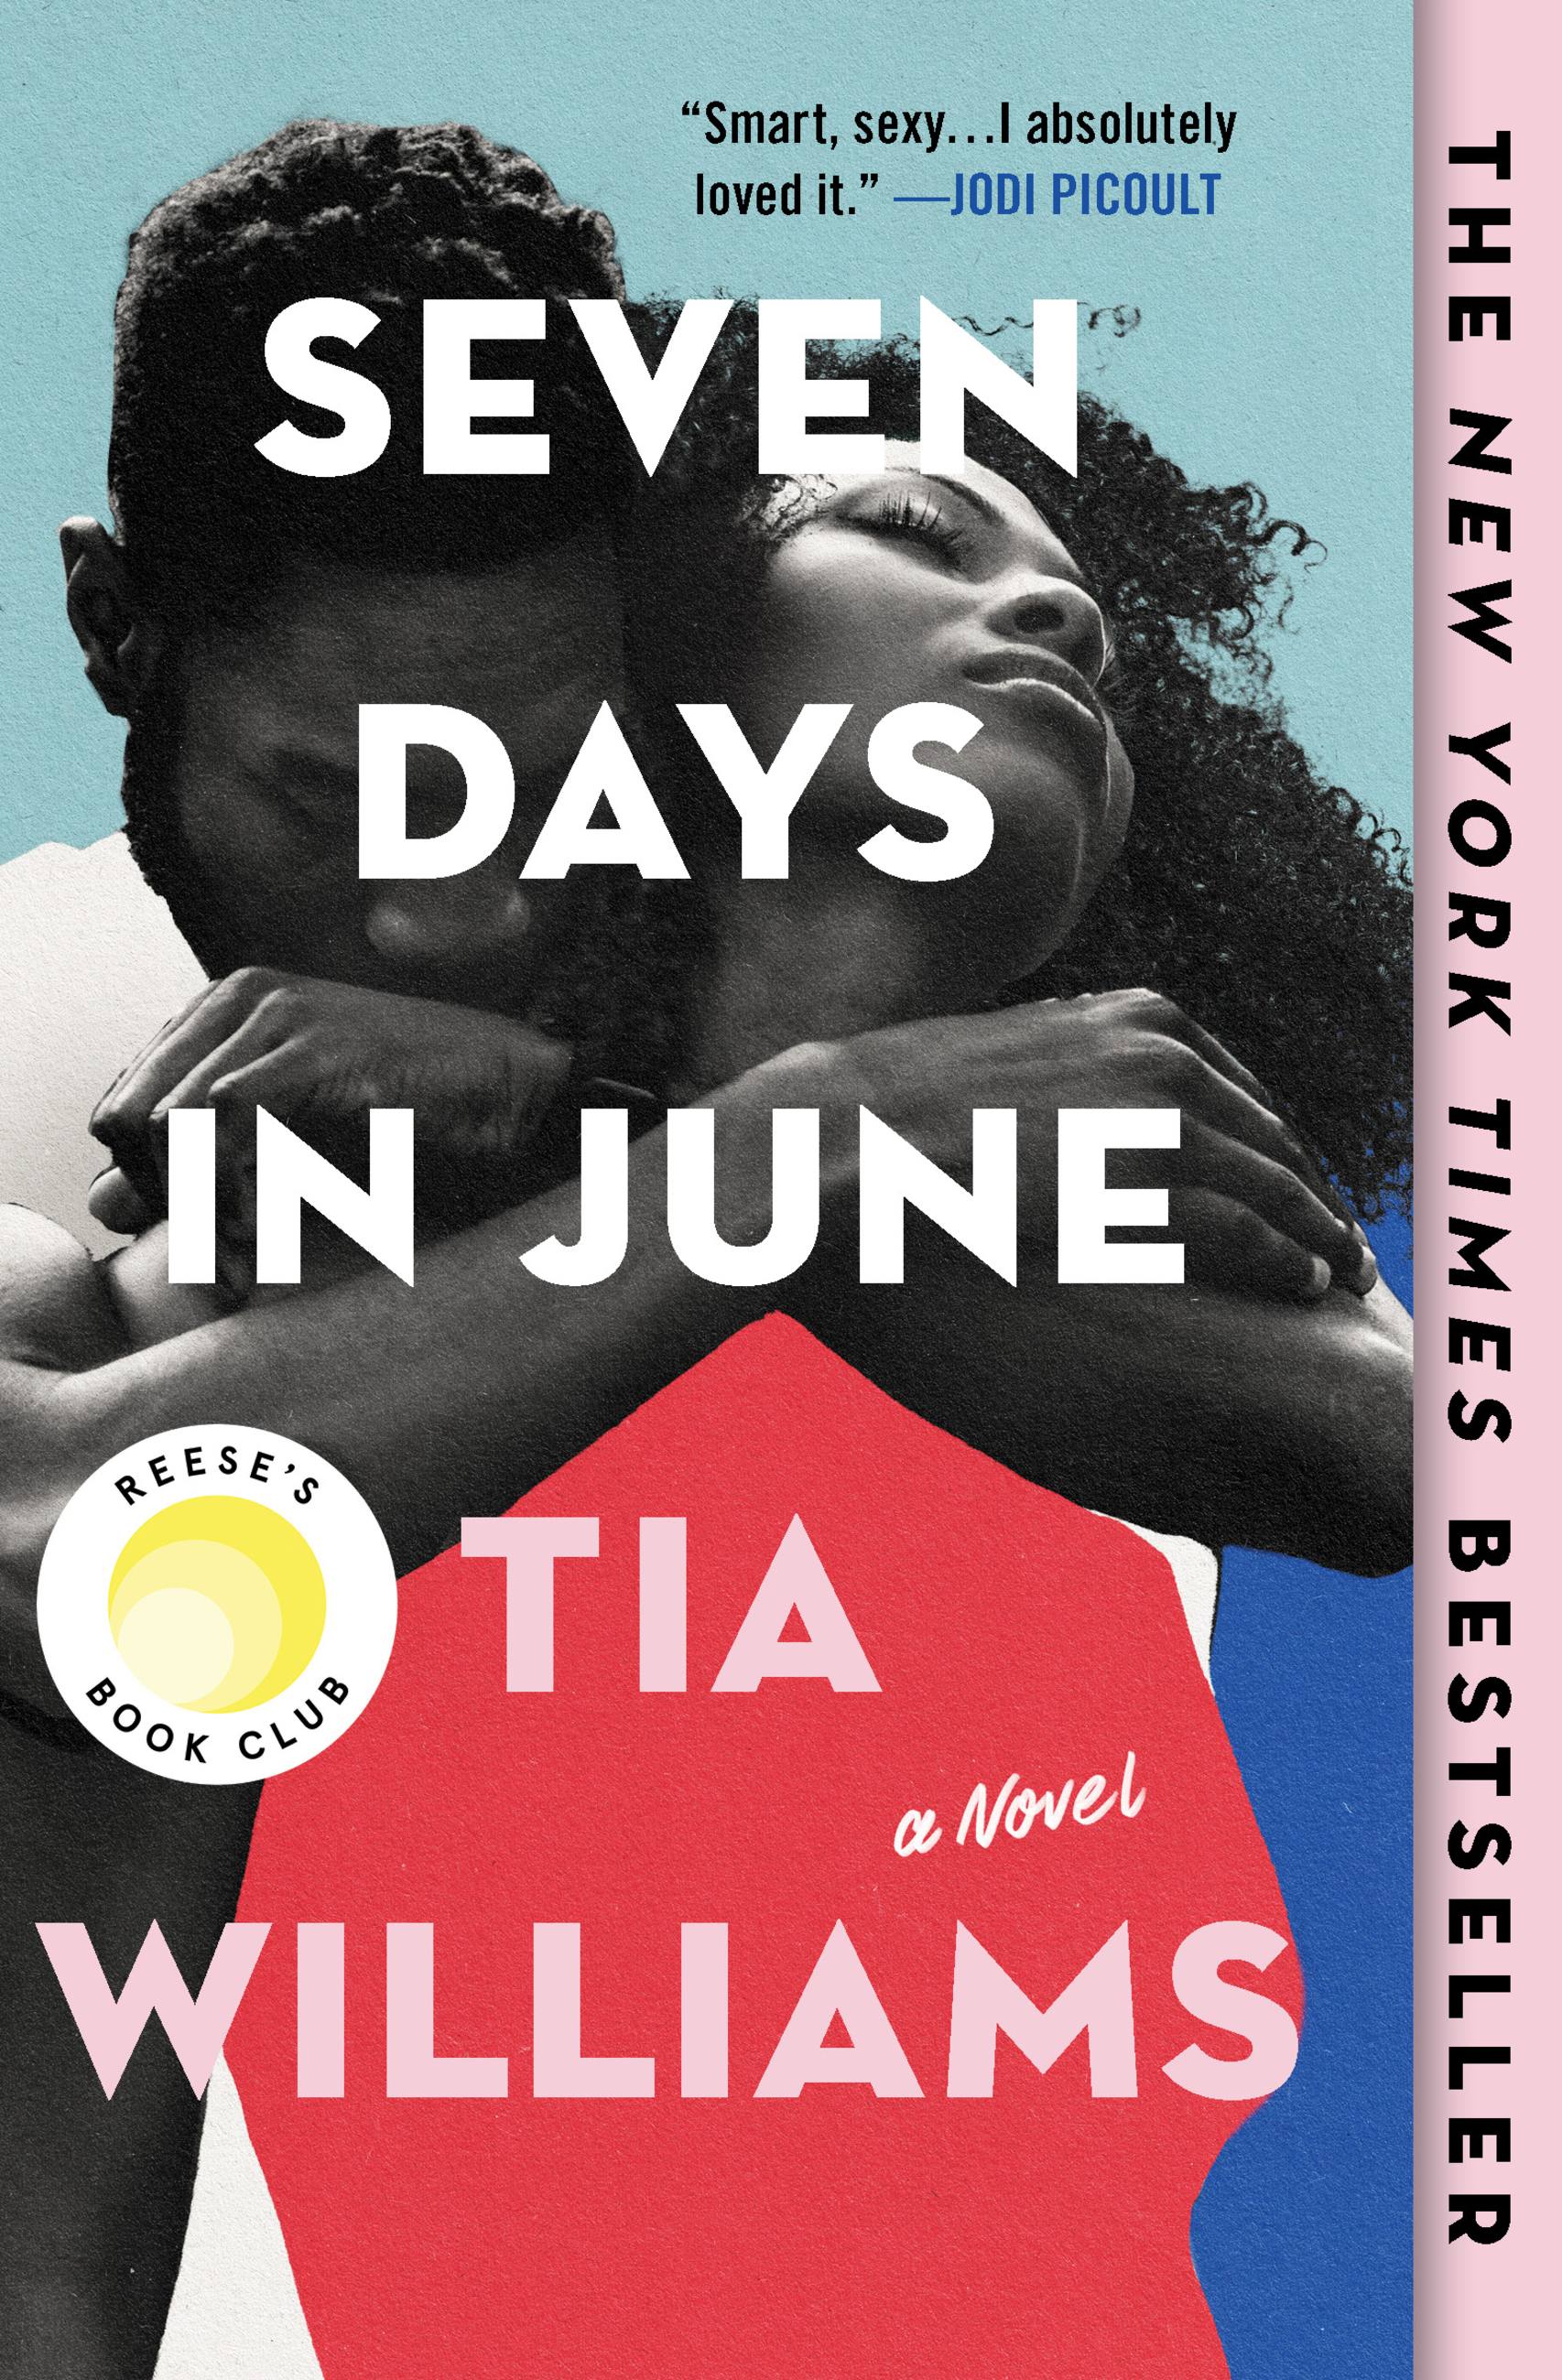 Small Ass Teen - Seven Days in June by Tia Williams | Hachette Book Group